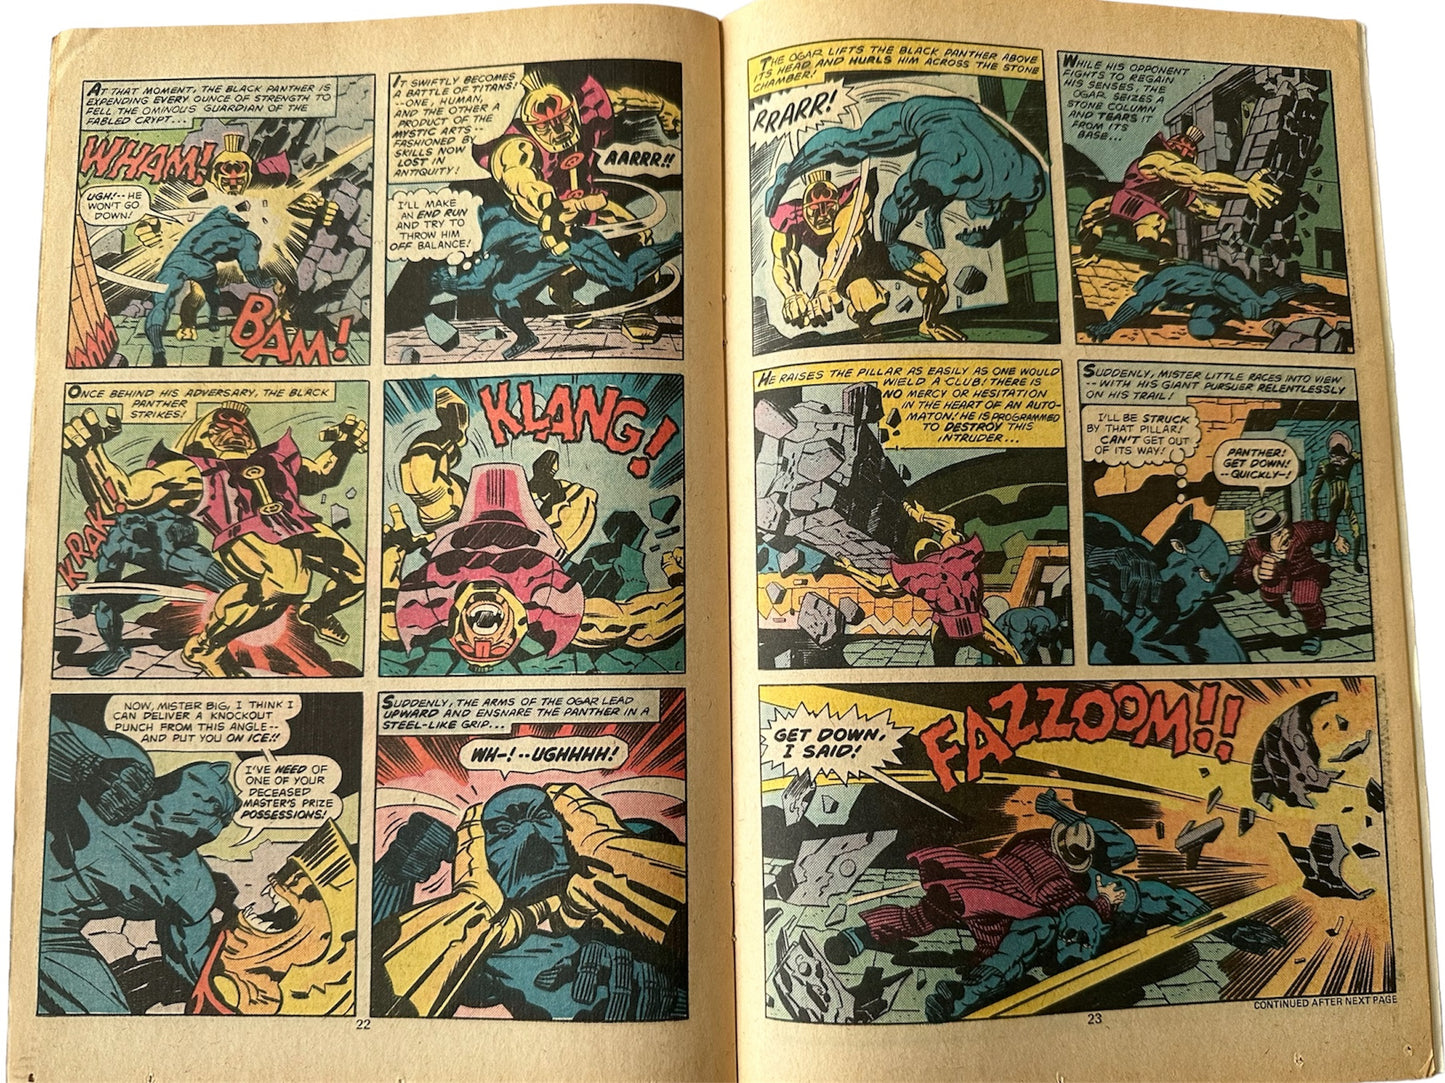 Vintage 1977 Marvels - The Black Panther Comic Issue Number 3 - Chaos In King Solomons Tomb - Race Against Time - First Print - Fantastic Condition Vintage Comic